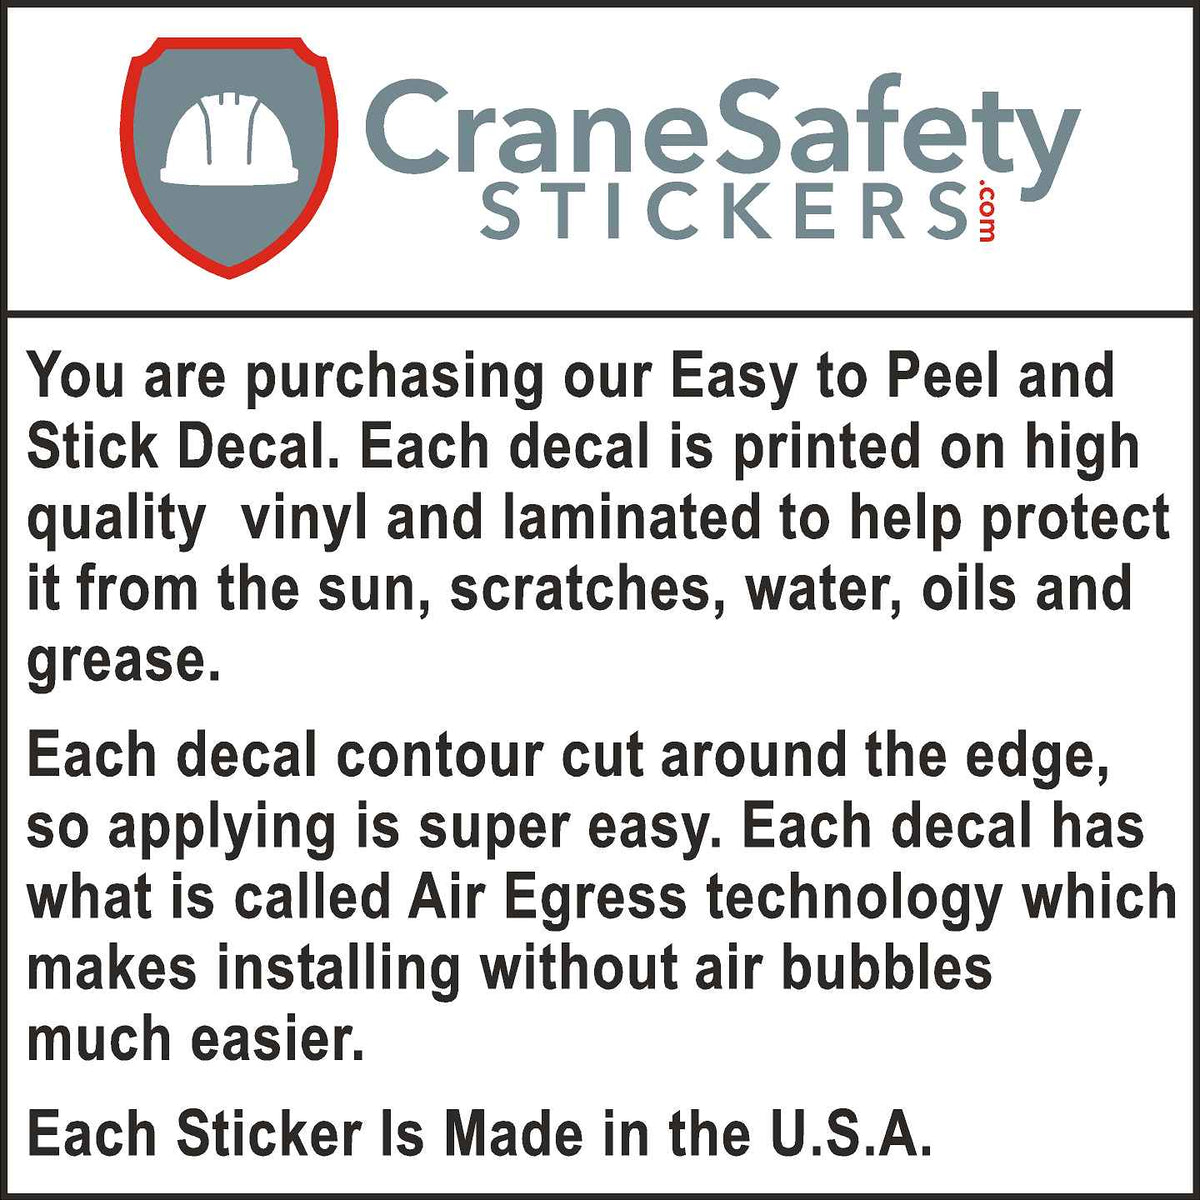 The quality of our Certified crane operator sticker.